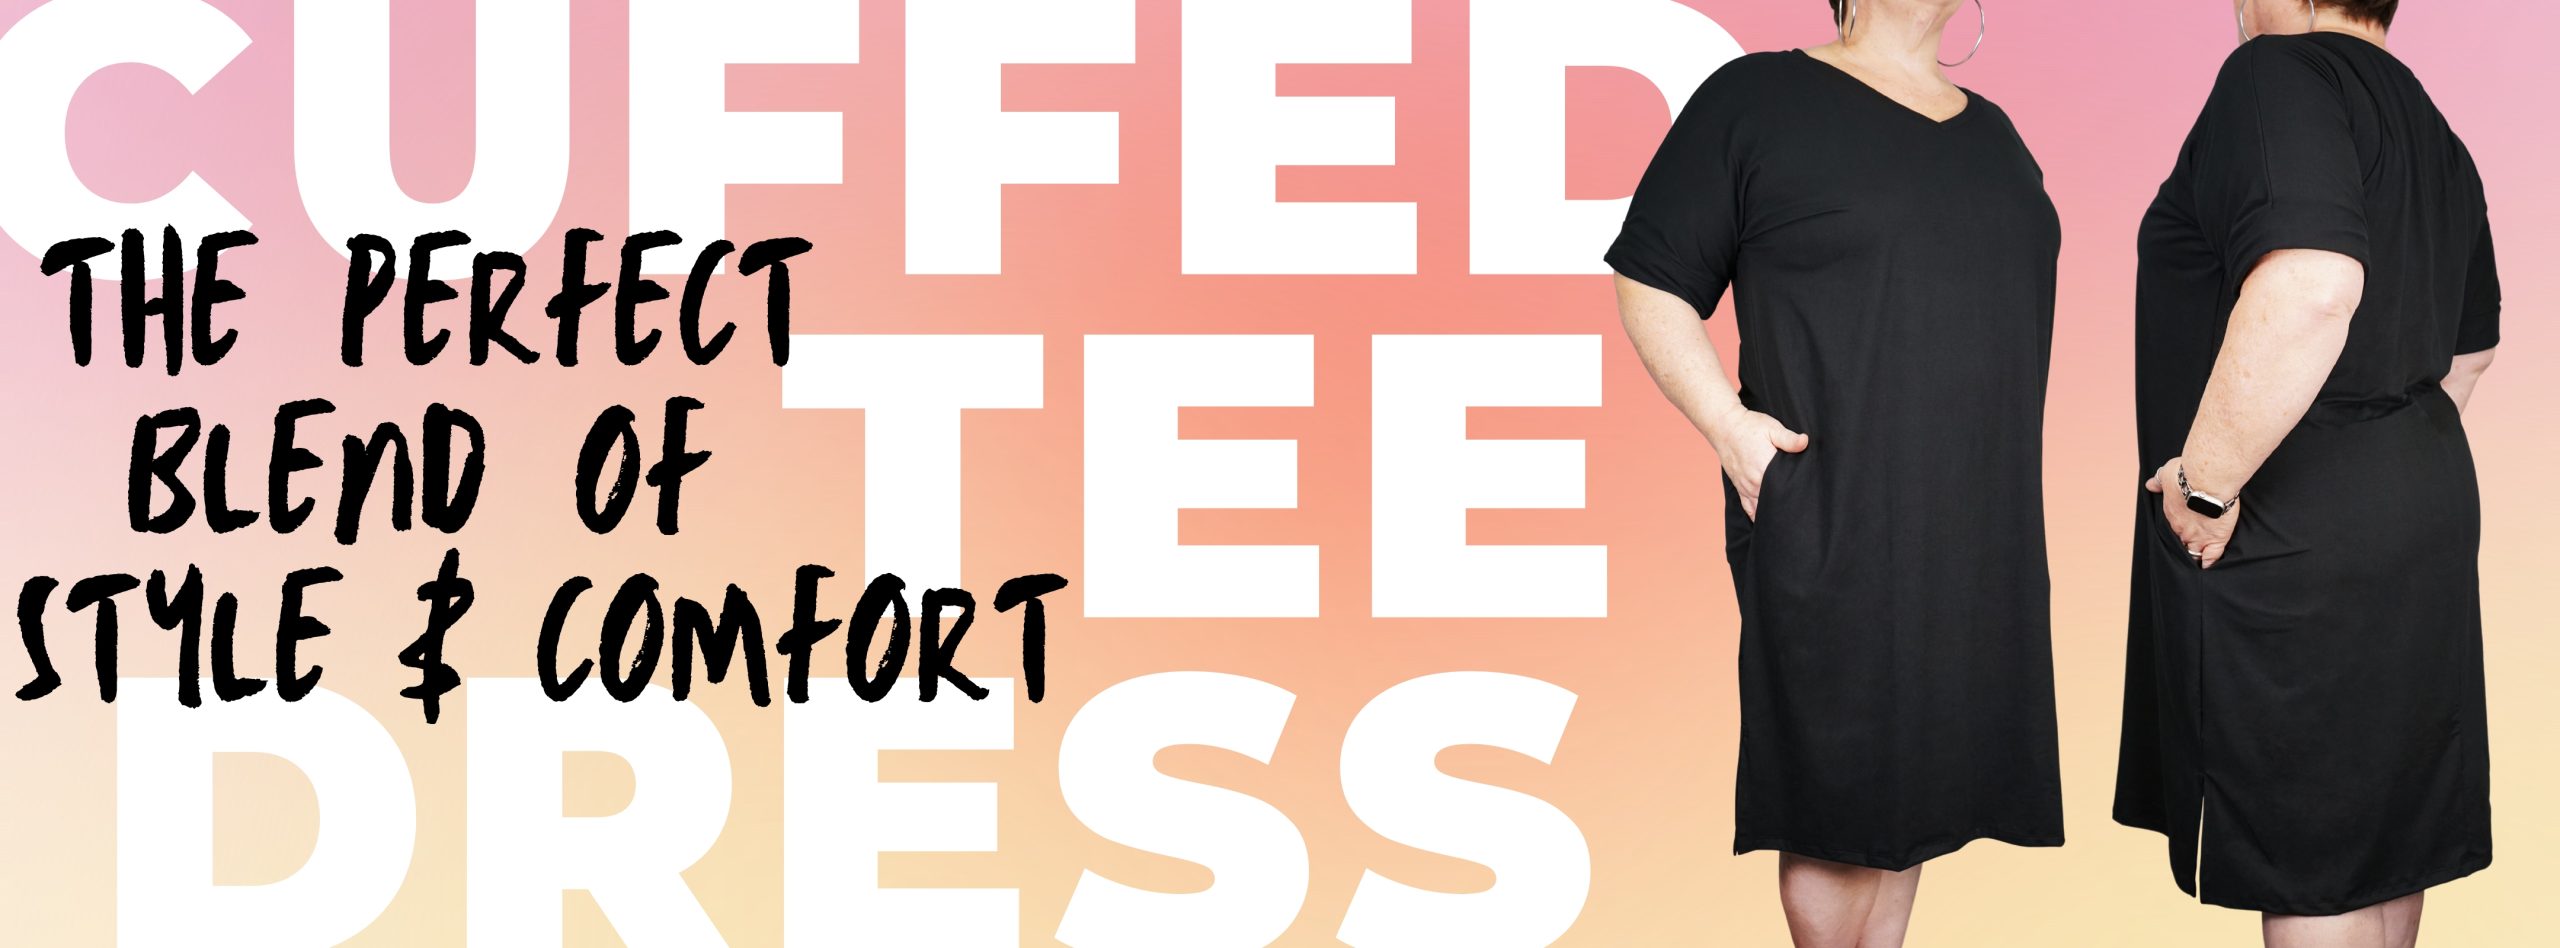 Banner displaying our newest dress called the Cuffed Tee Dress. The text says "the perfect blend of style and comfort"